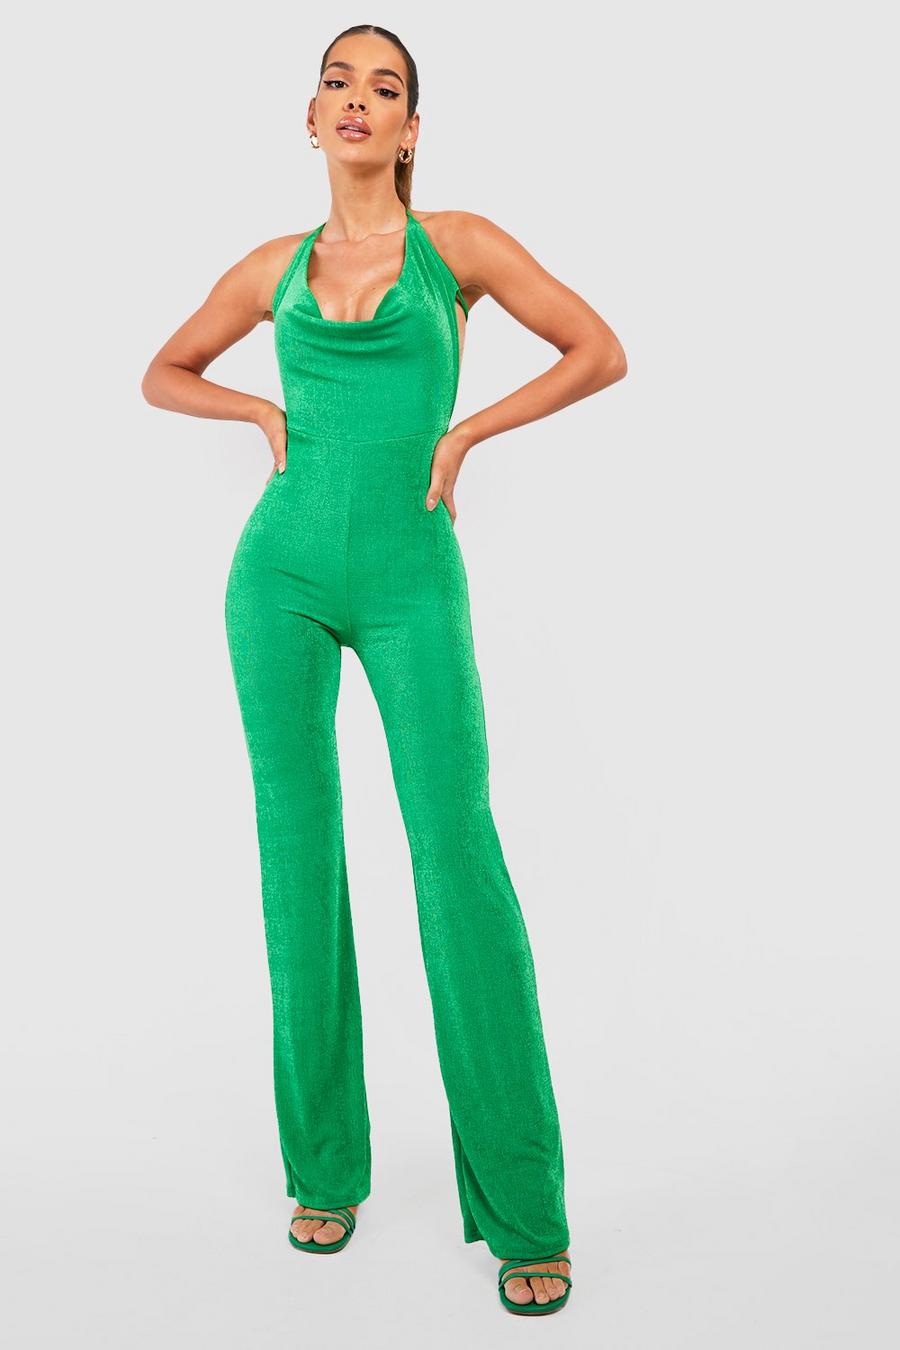 Bright green Textured Slinky Cowl Neck Jumpsuit